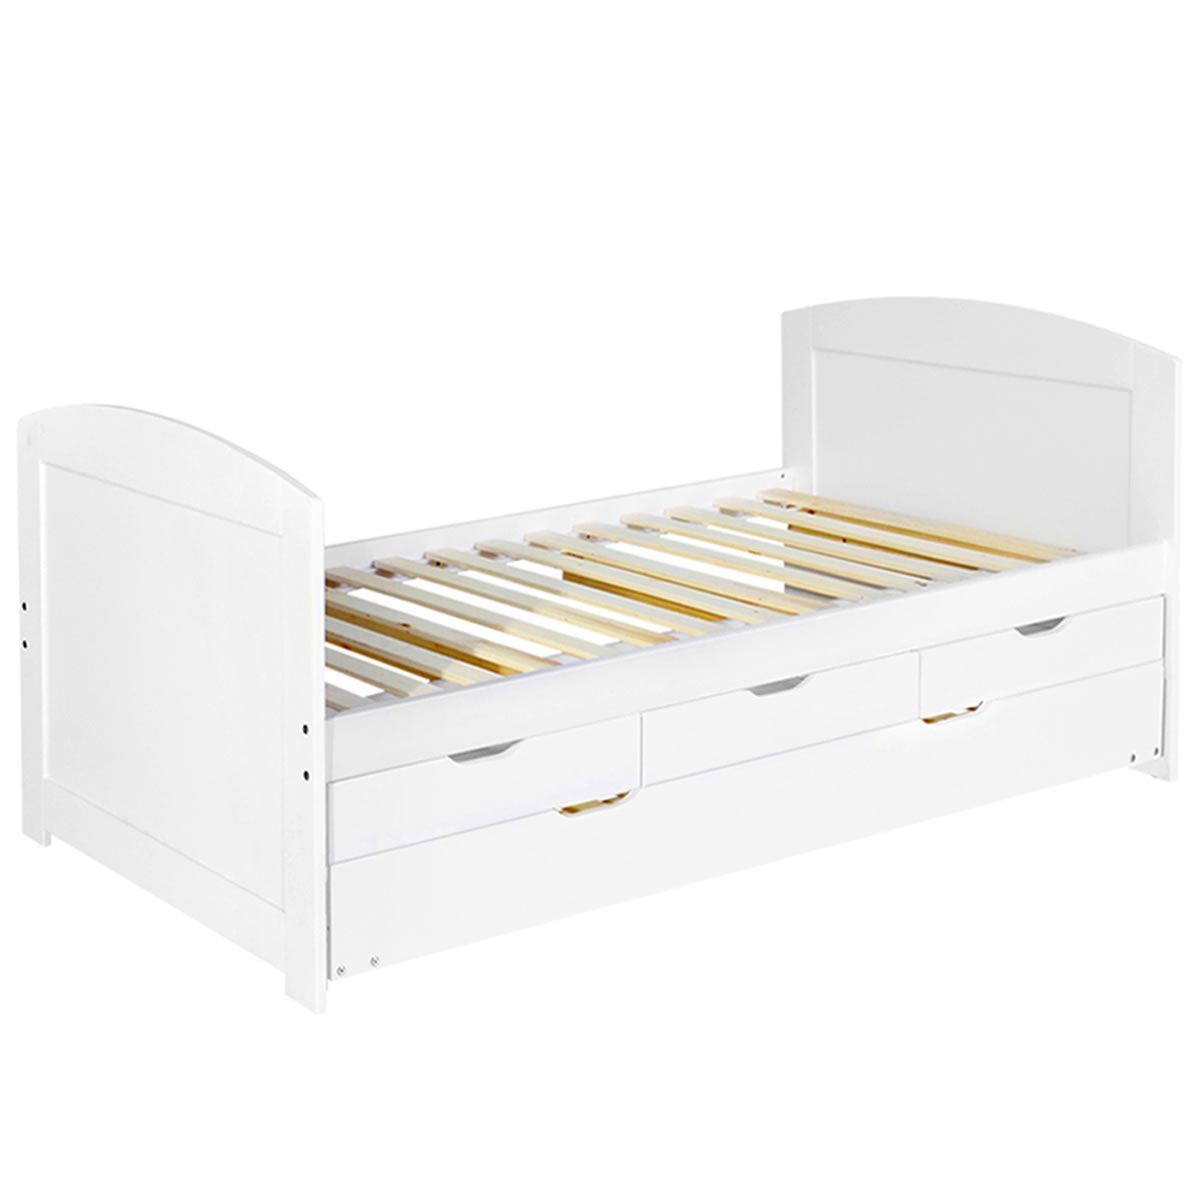 Wooden Bed Frame Pine Wood with Drawers - Single White